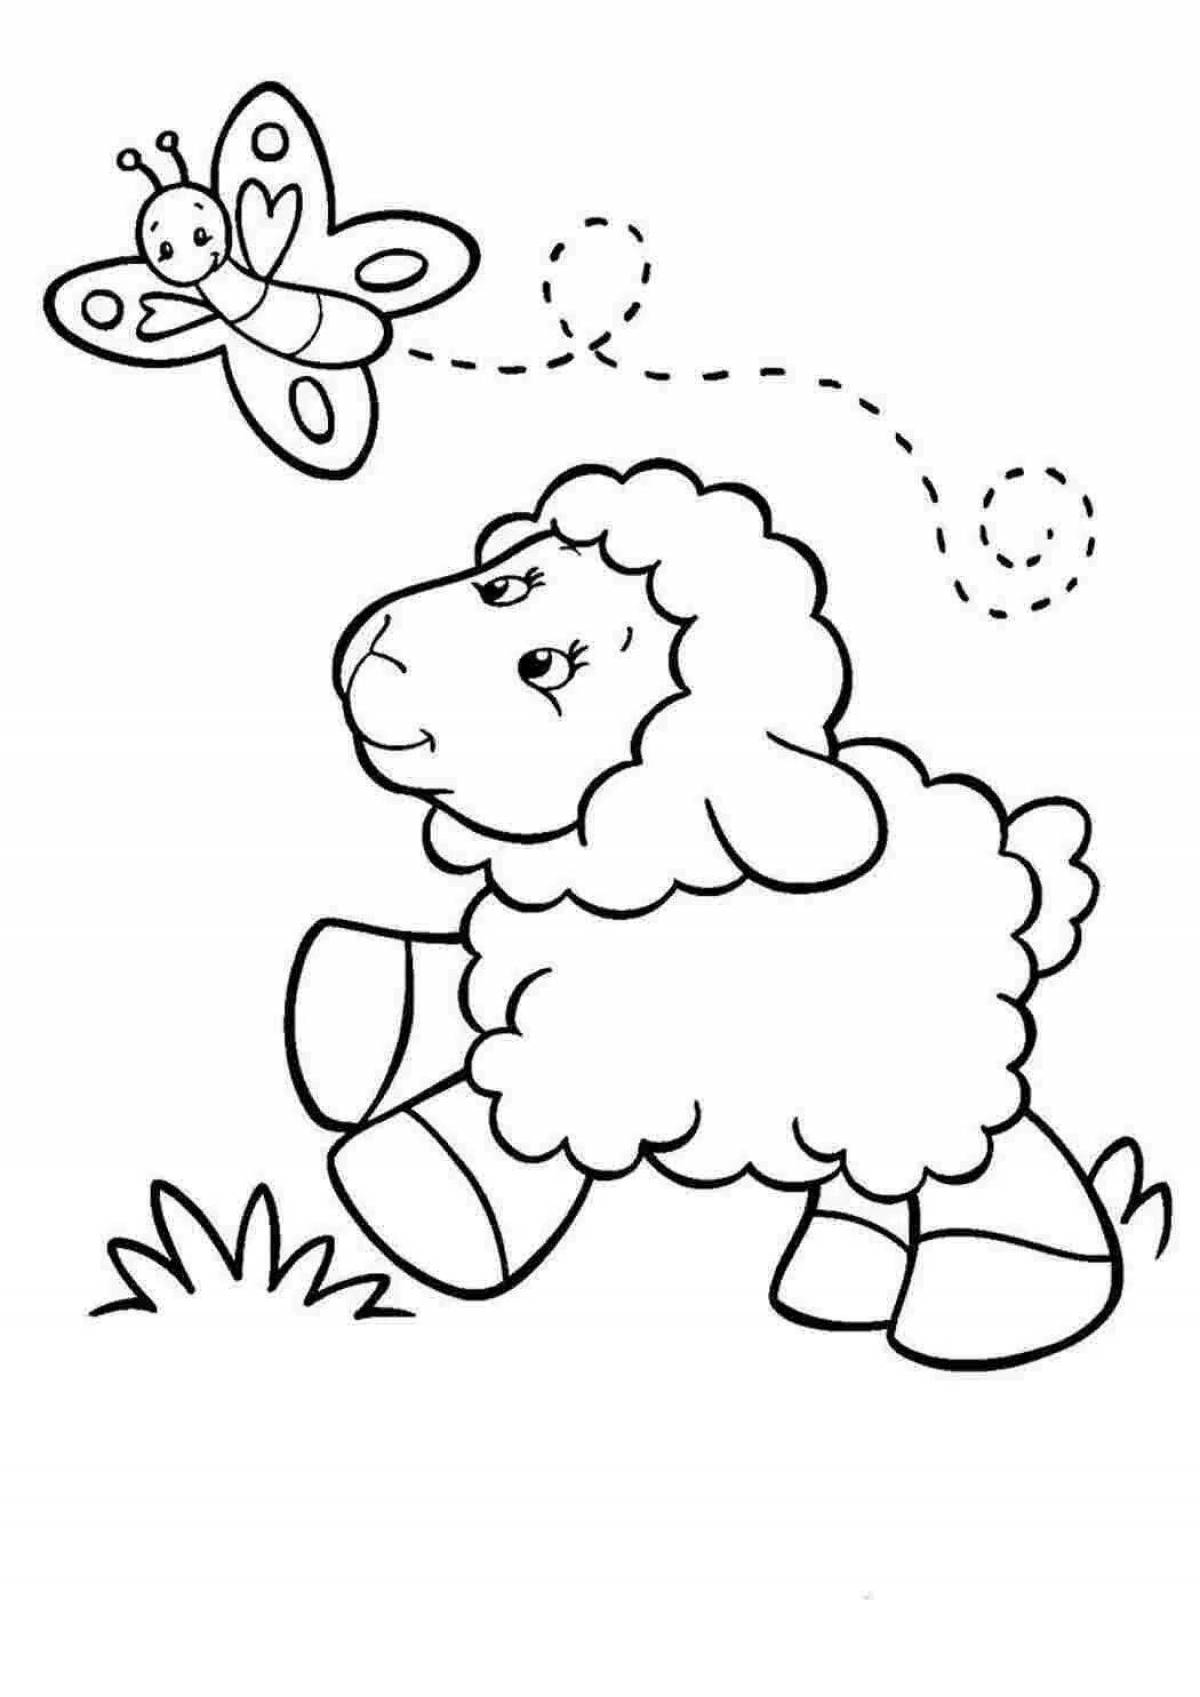 Crazy sheep coloring book for 5-6 year olds